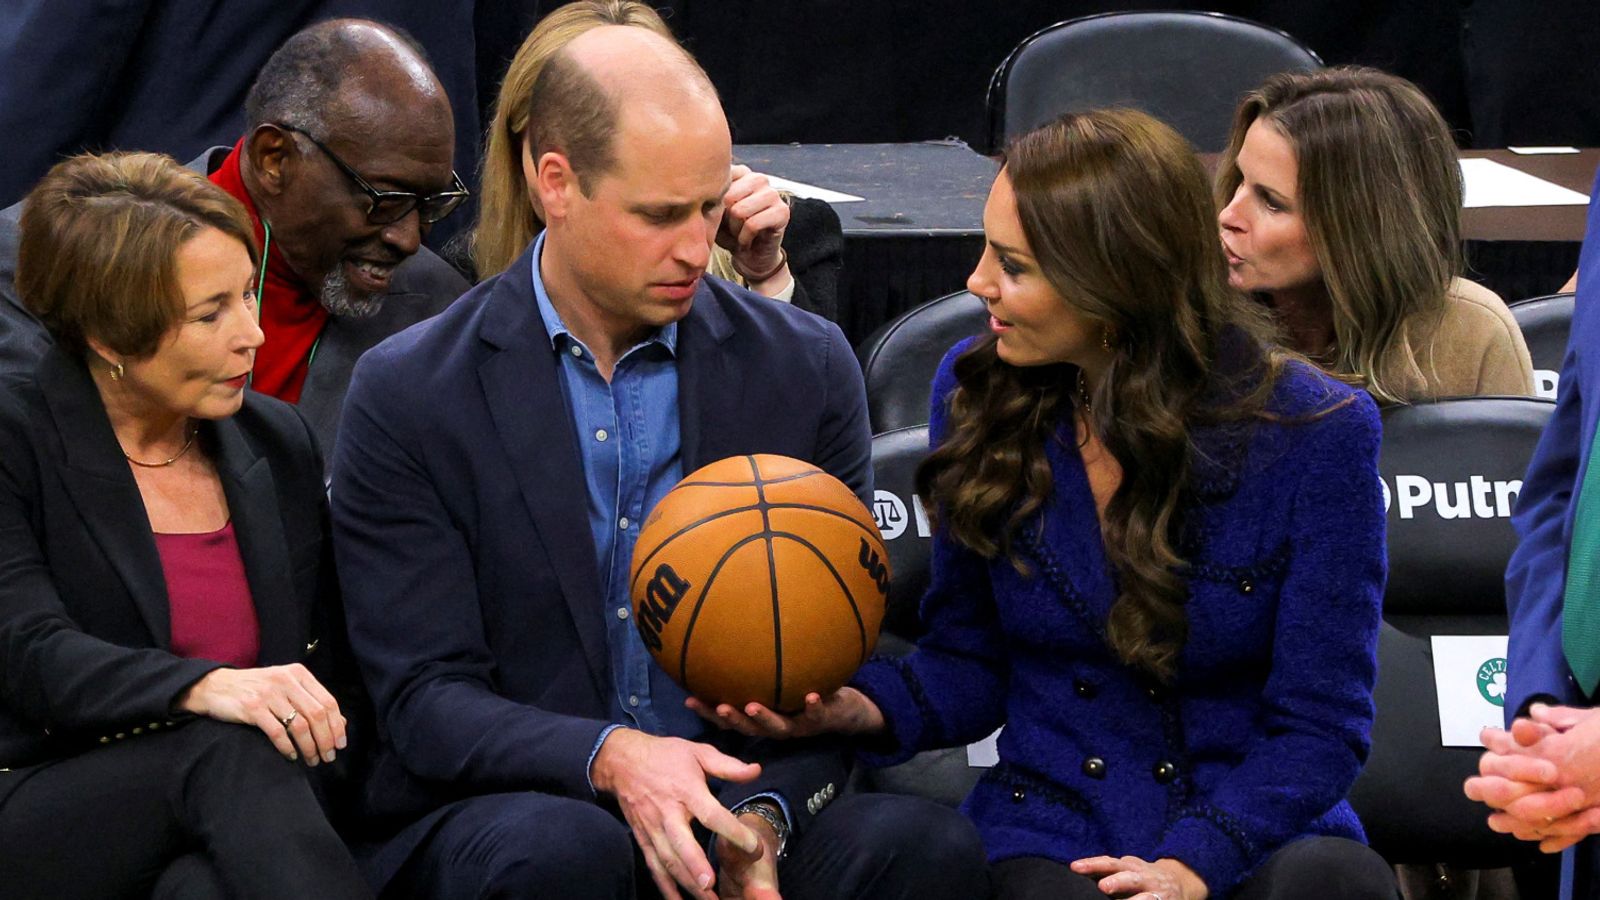 William and Kate in US as prince distances himself from race row